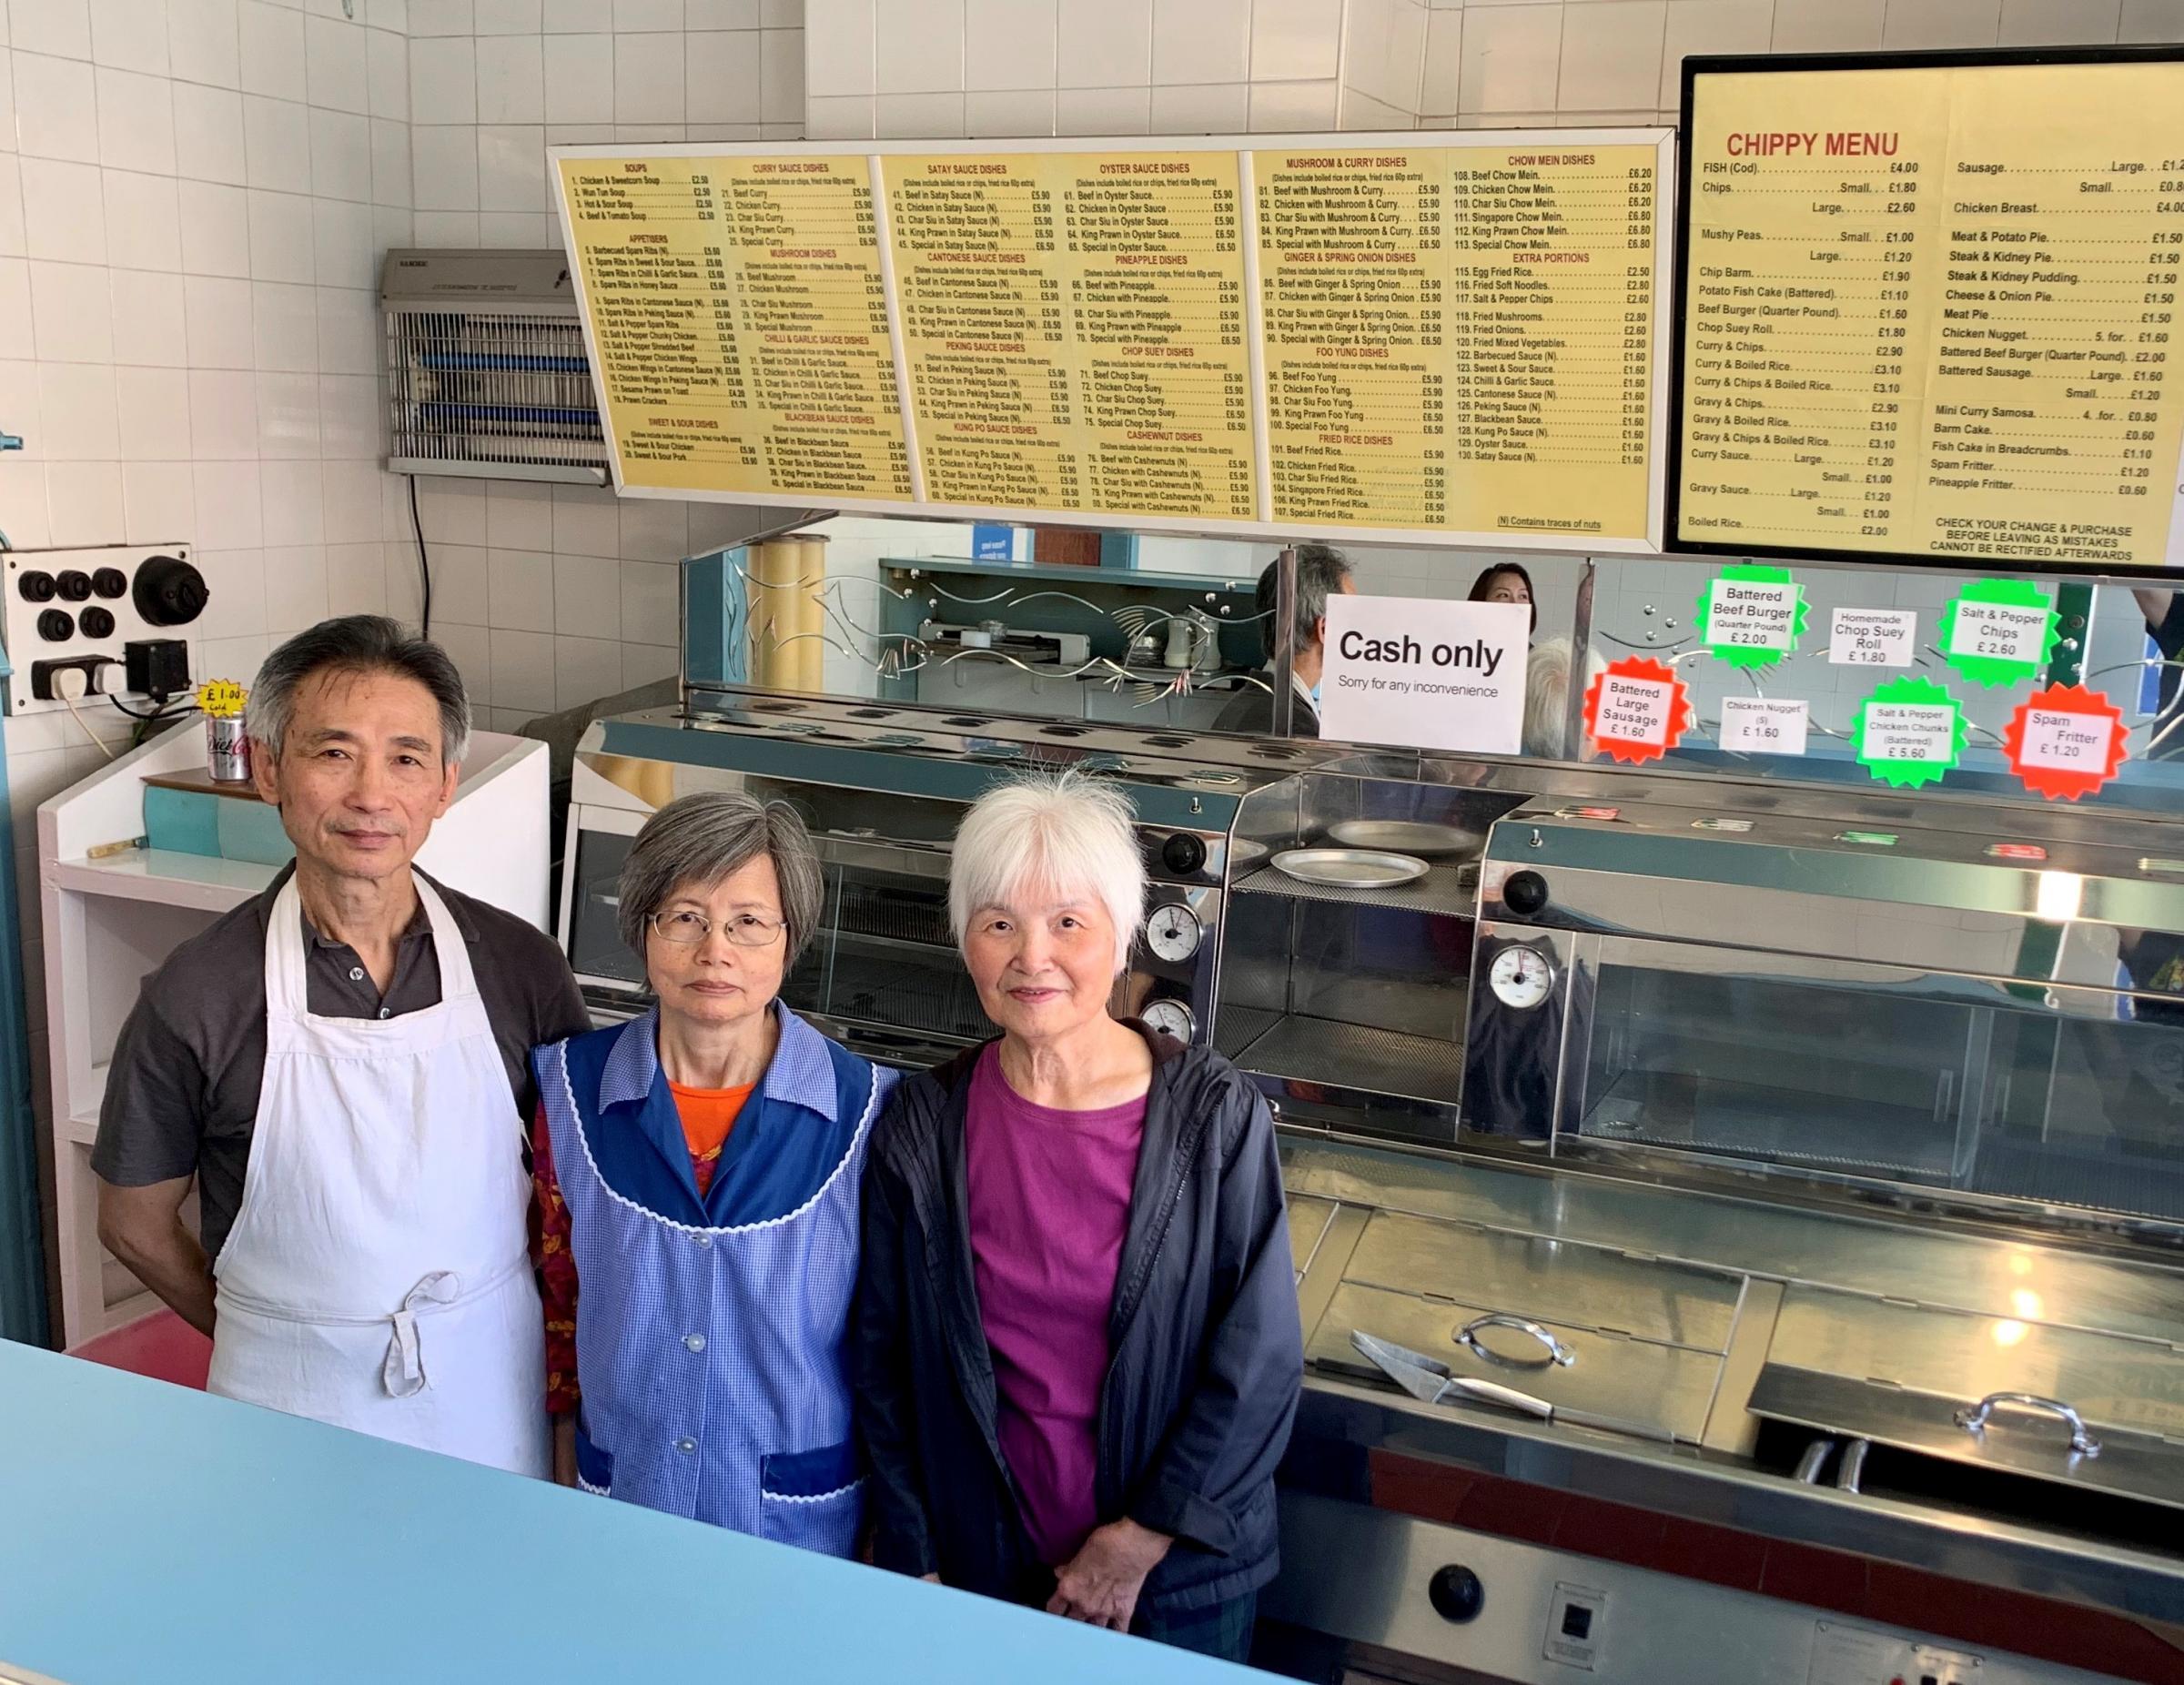 Wayne Hung, Che Mui Hung and Mrs Kong (left-right) pictured in the chippy